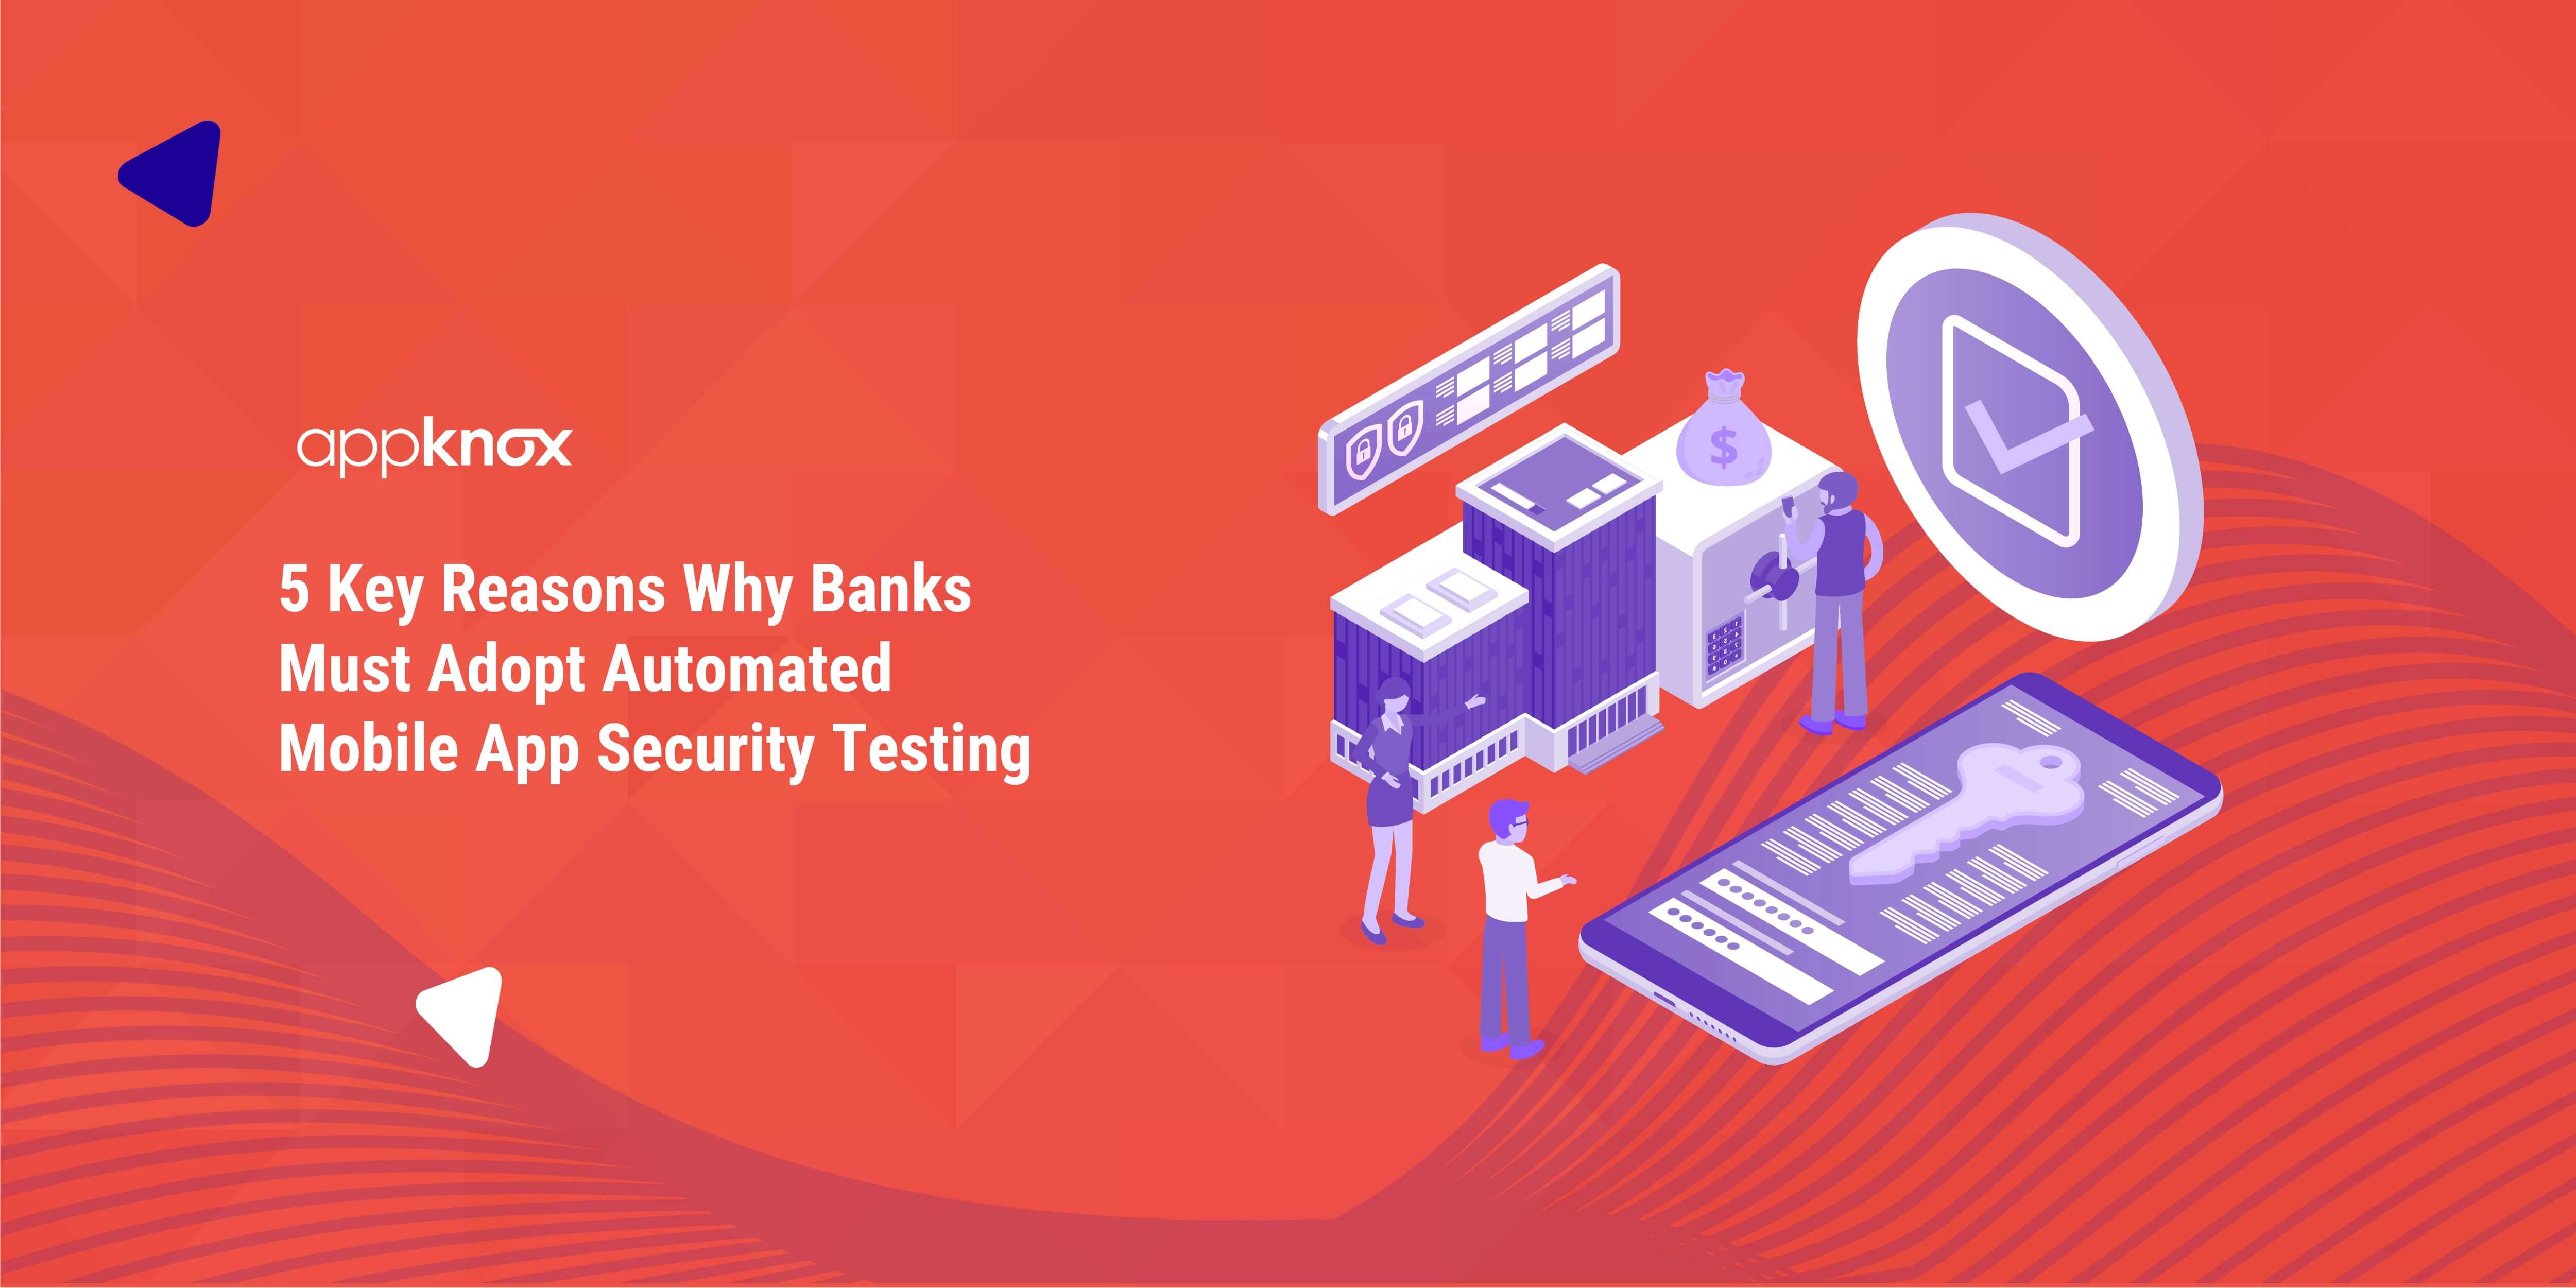 5 Key Reasons Why Banks Must Adopt Automated Mobile App Security Testing